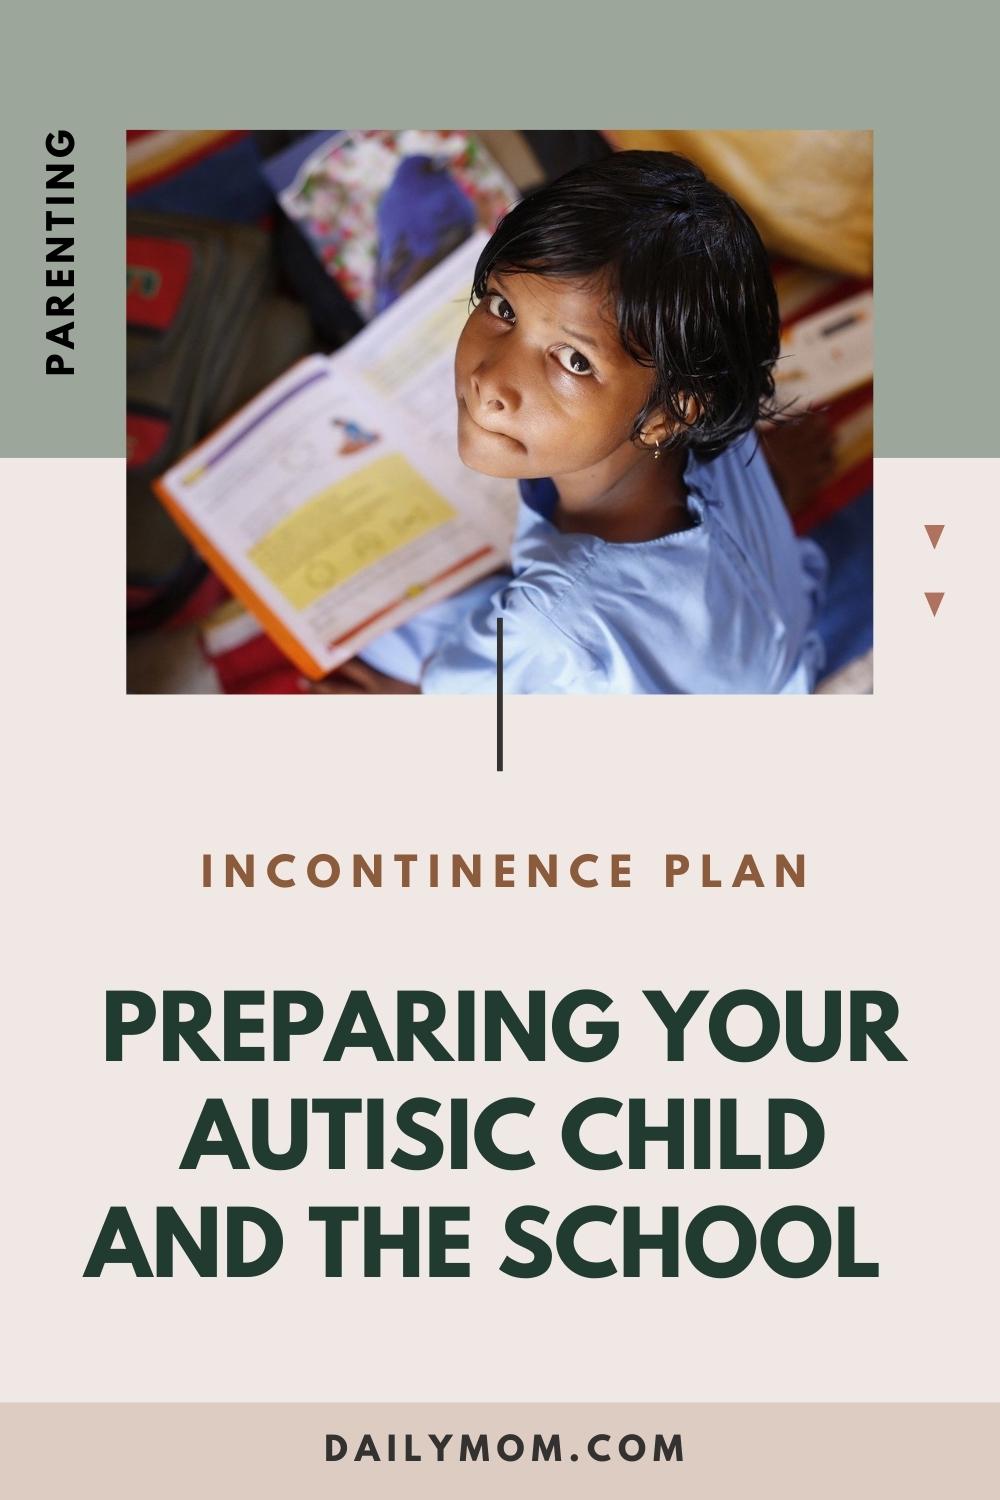 10 Tips To Preparing Your Autistic Child For Incontinence Care At School